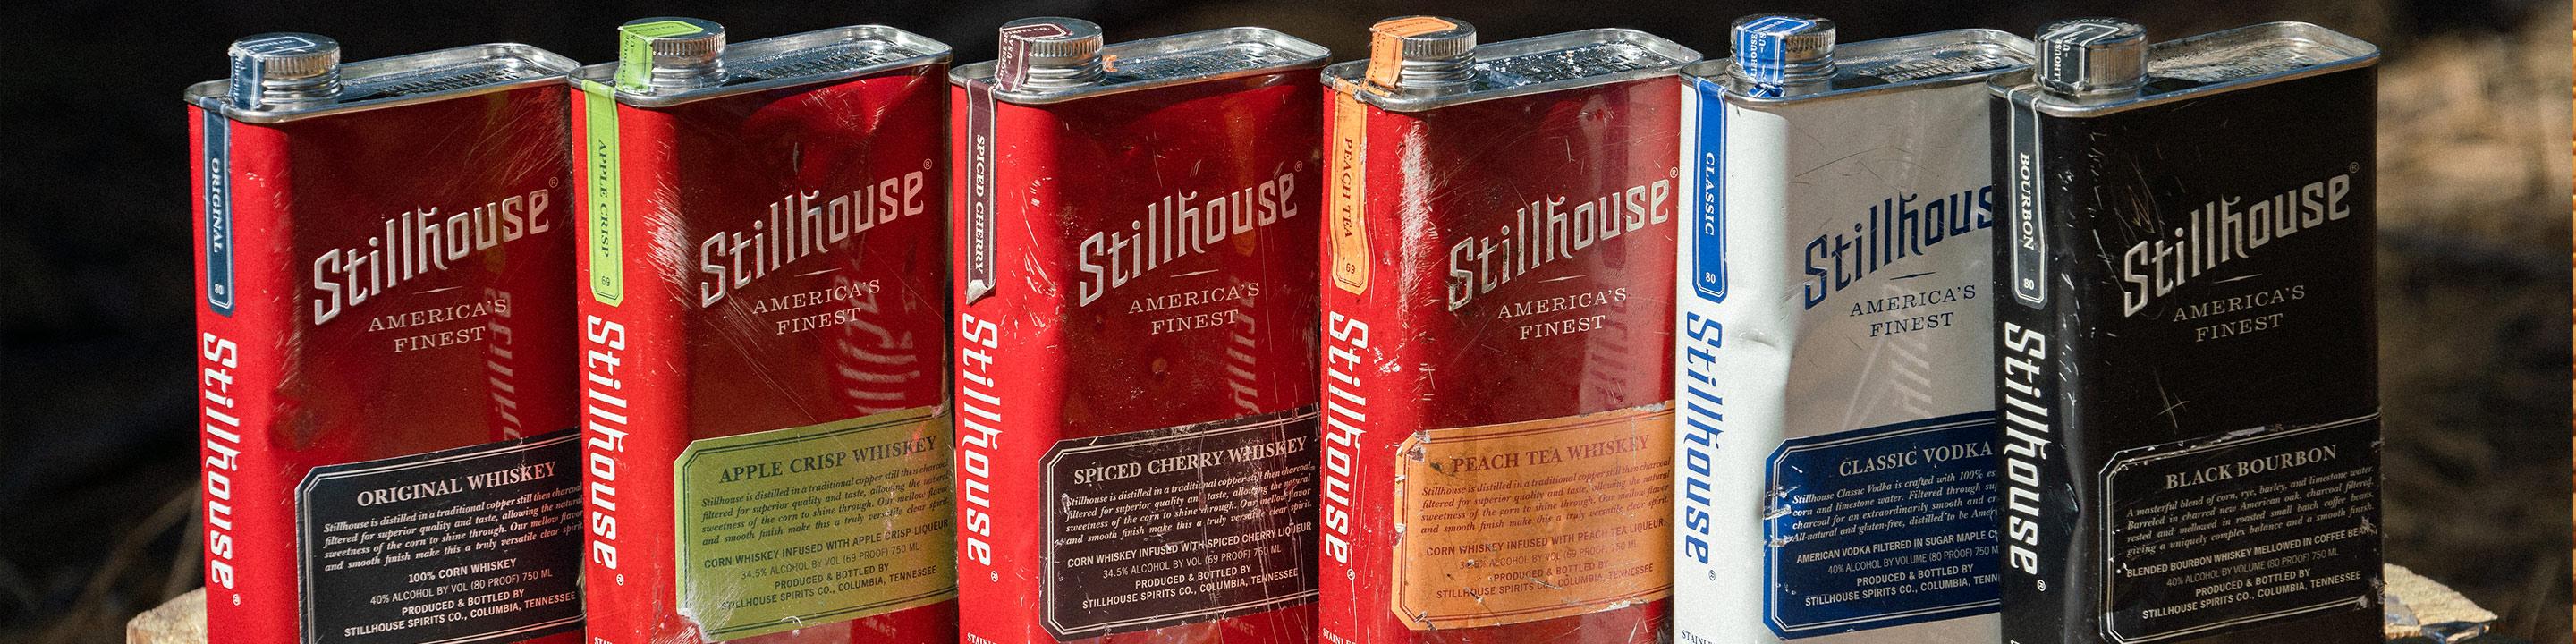 Stillhouse, the Unbreakable Spirit, allows you to take good times where glass can't follow with a range of flavored whiskeys, bourbon and vodka that are clad in 100% stainless steel. Grab Stillhouse now and get your can out there with the official spirit of adventure. Welcome to Unbreakable Nation.